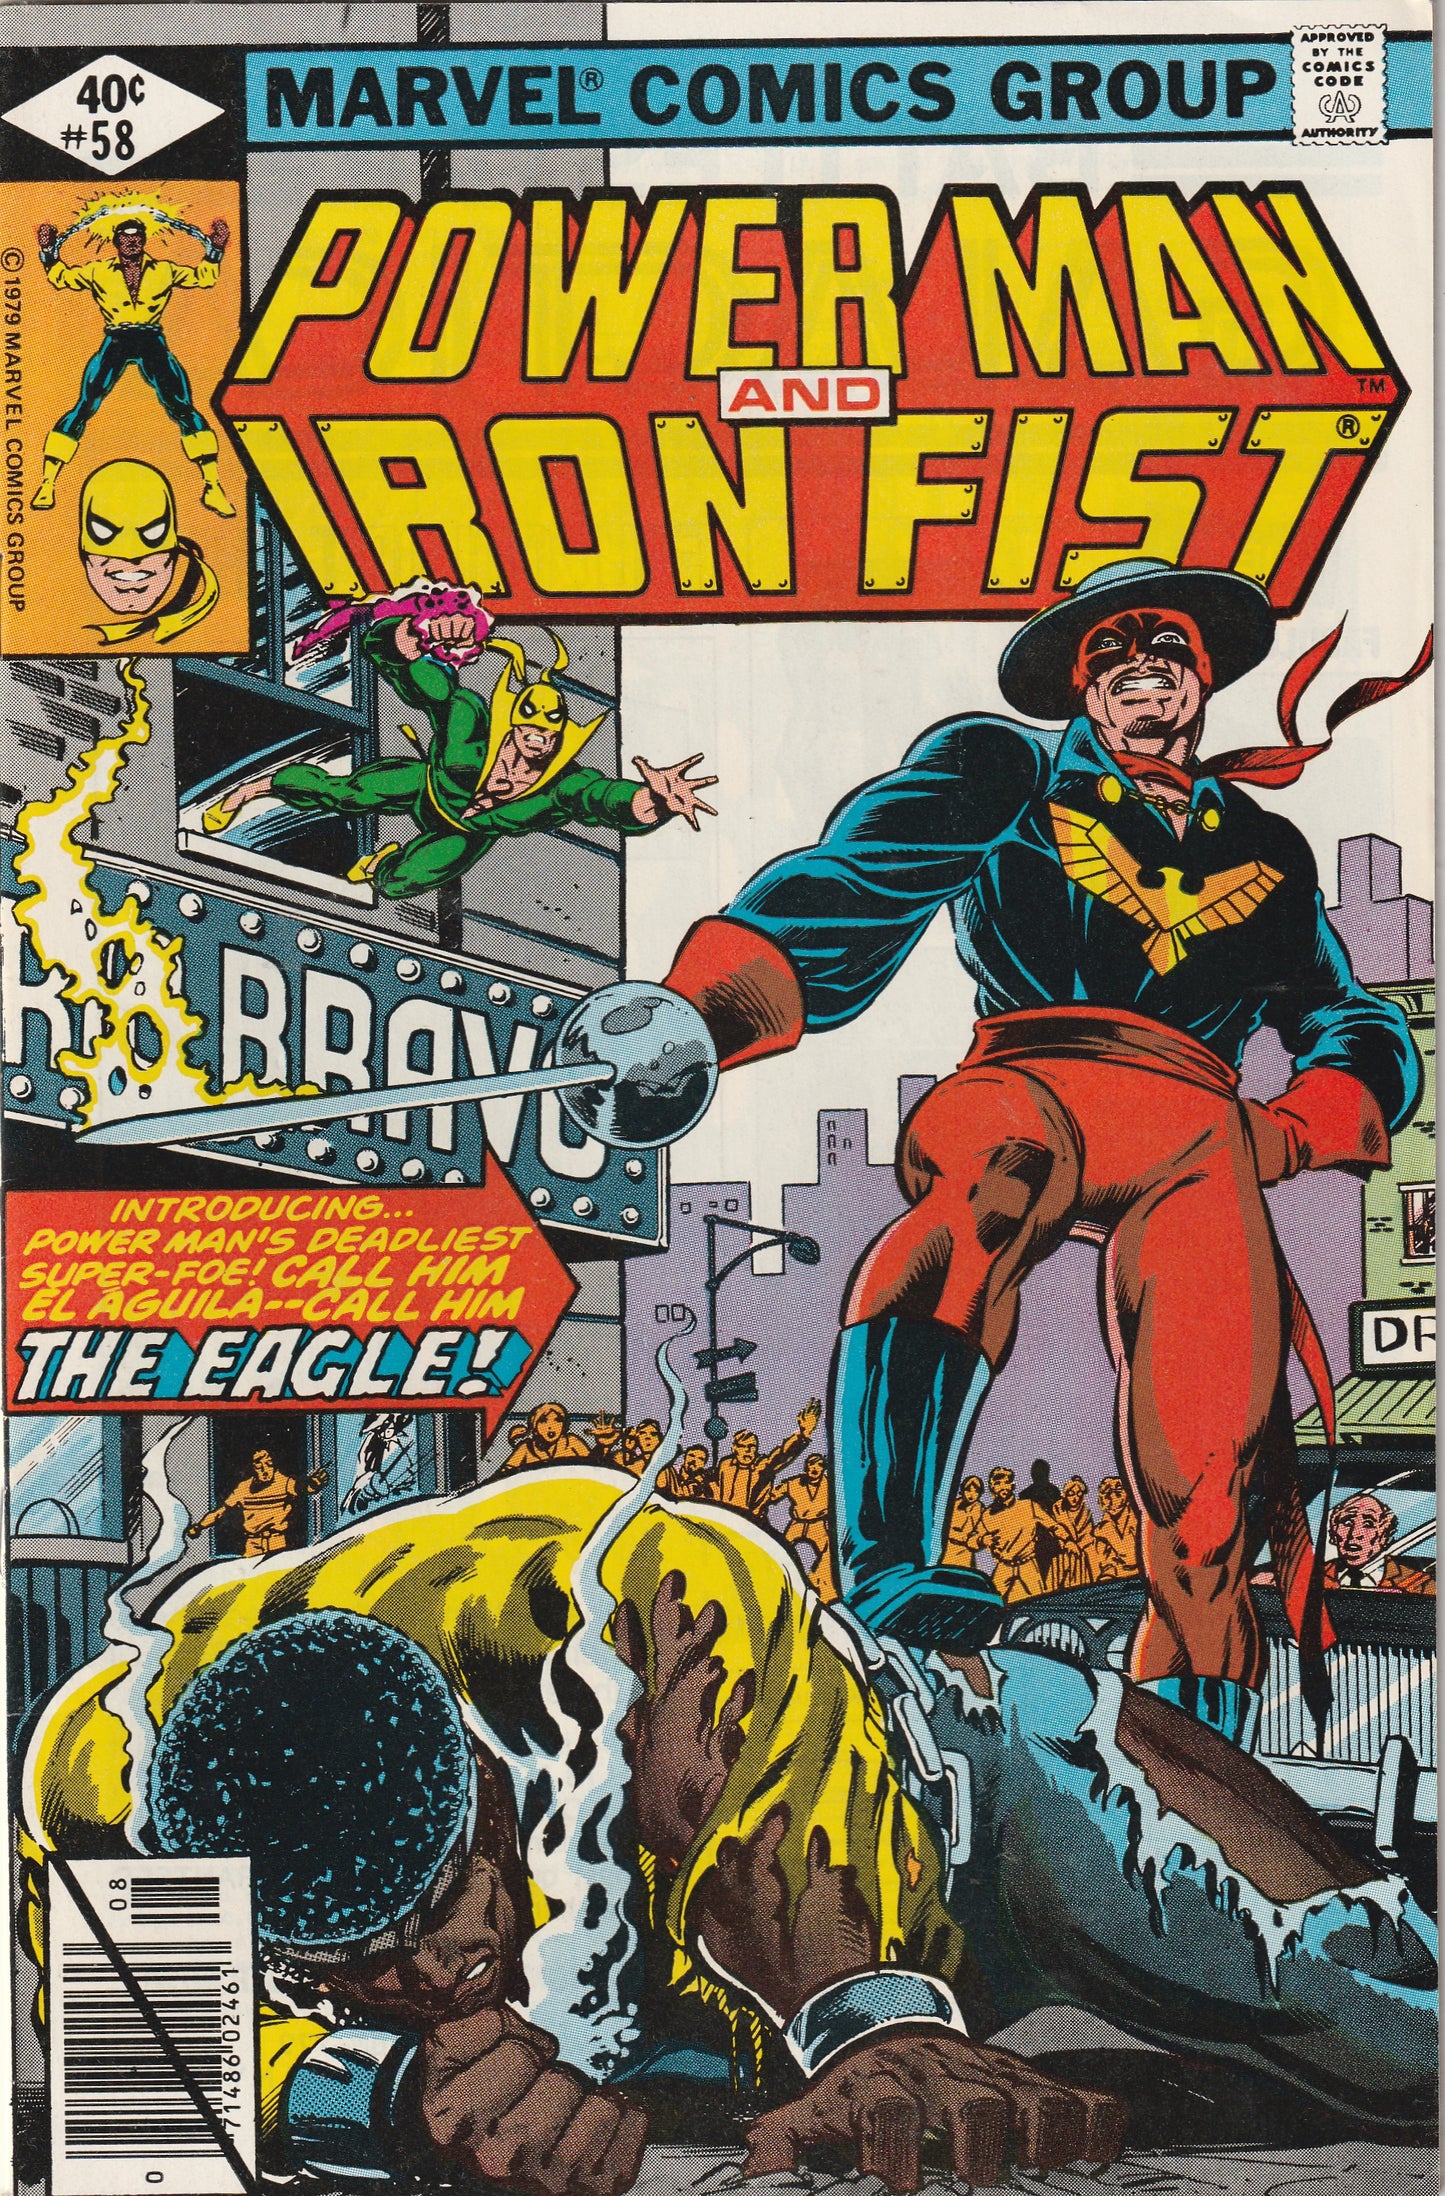 Power Man and Iron Fist #58 (1979) - 1st Appearance of El Aguila